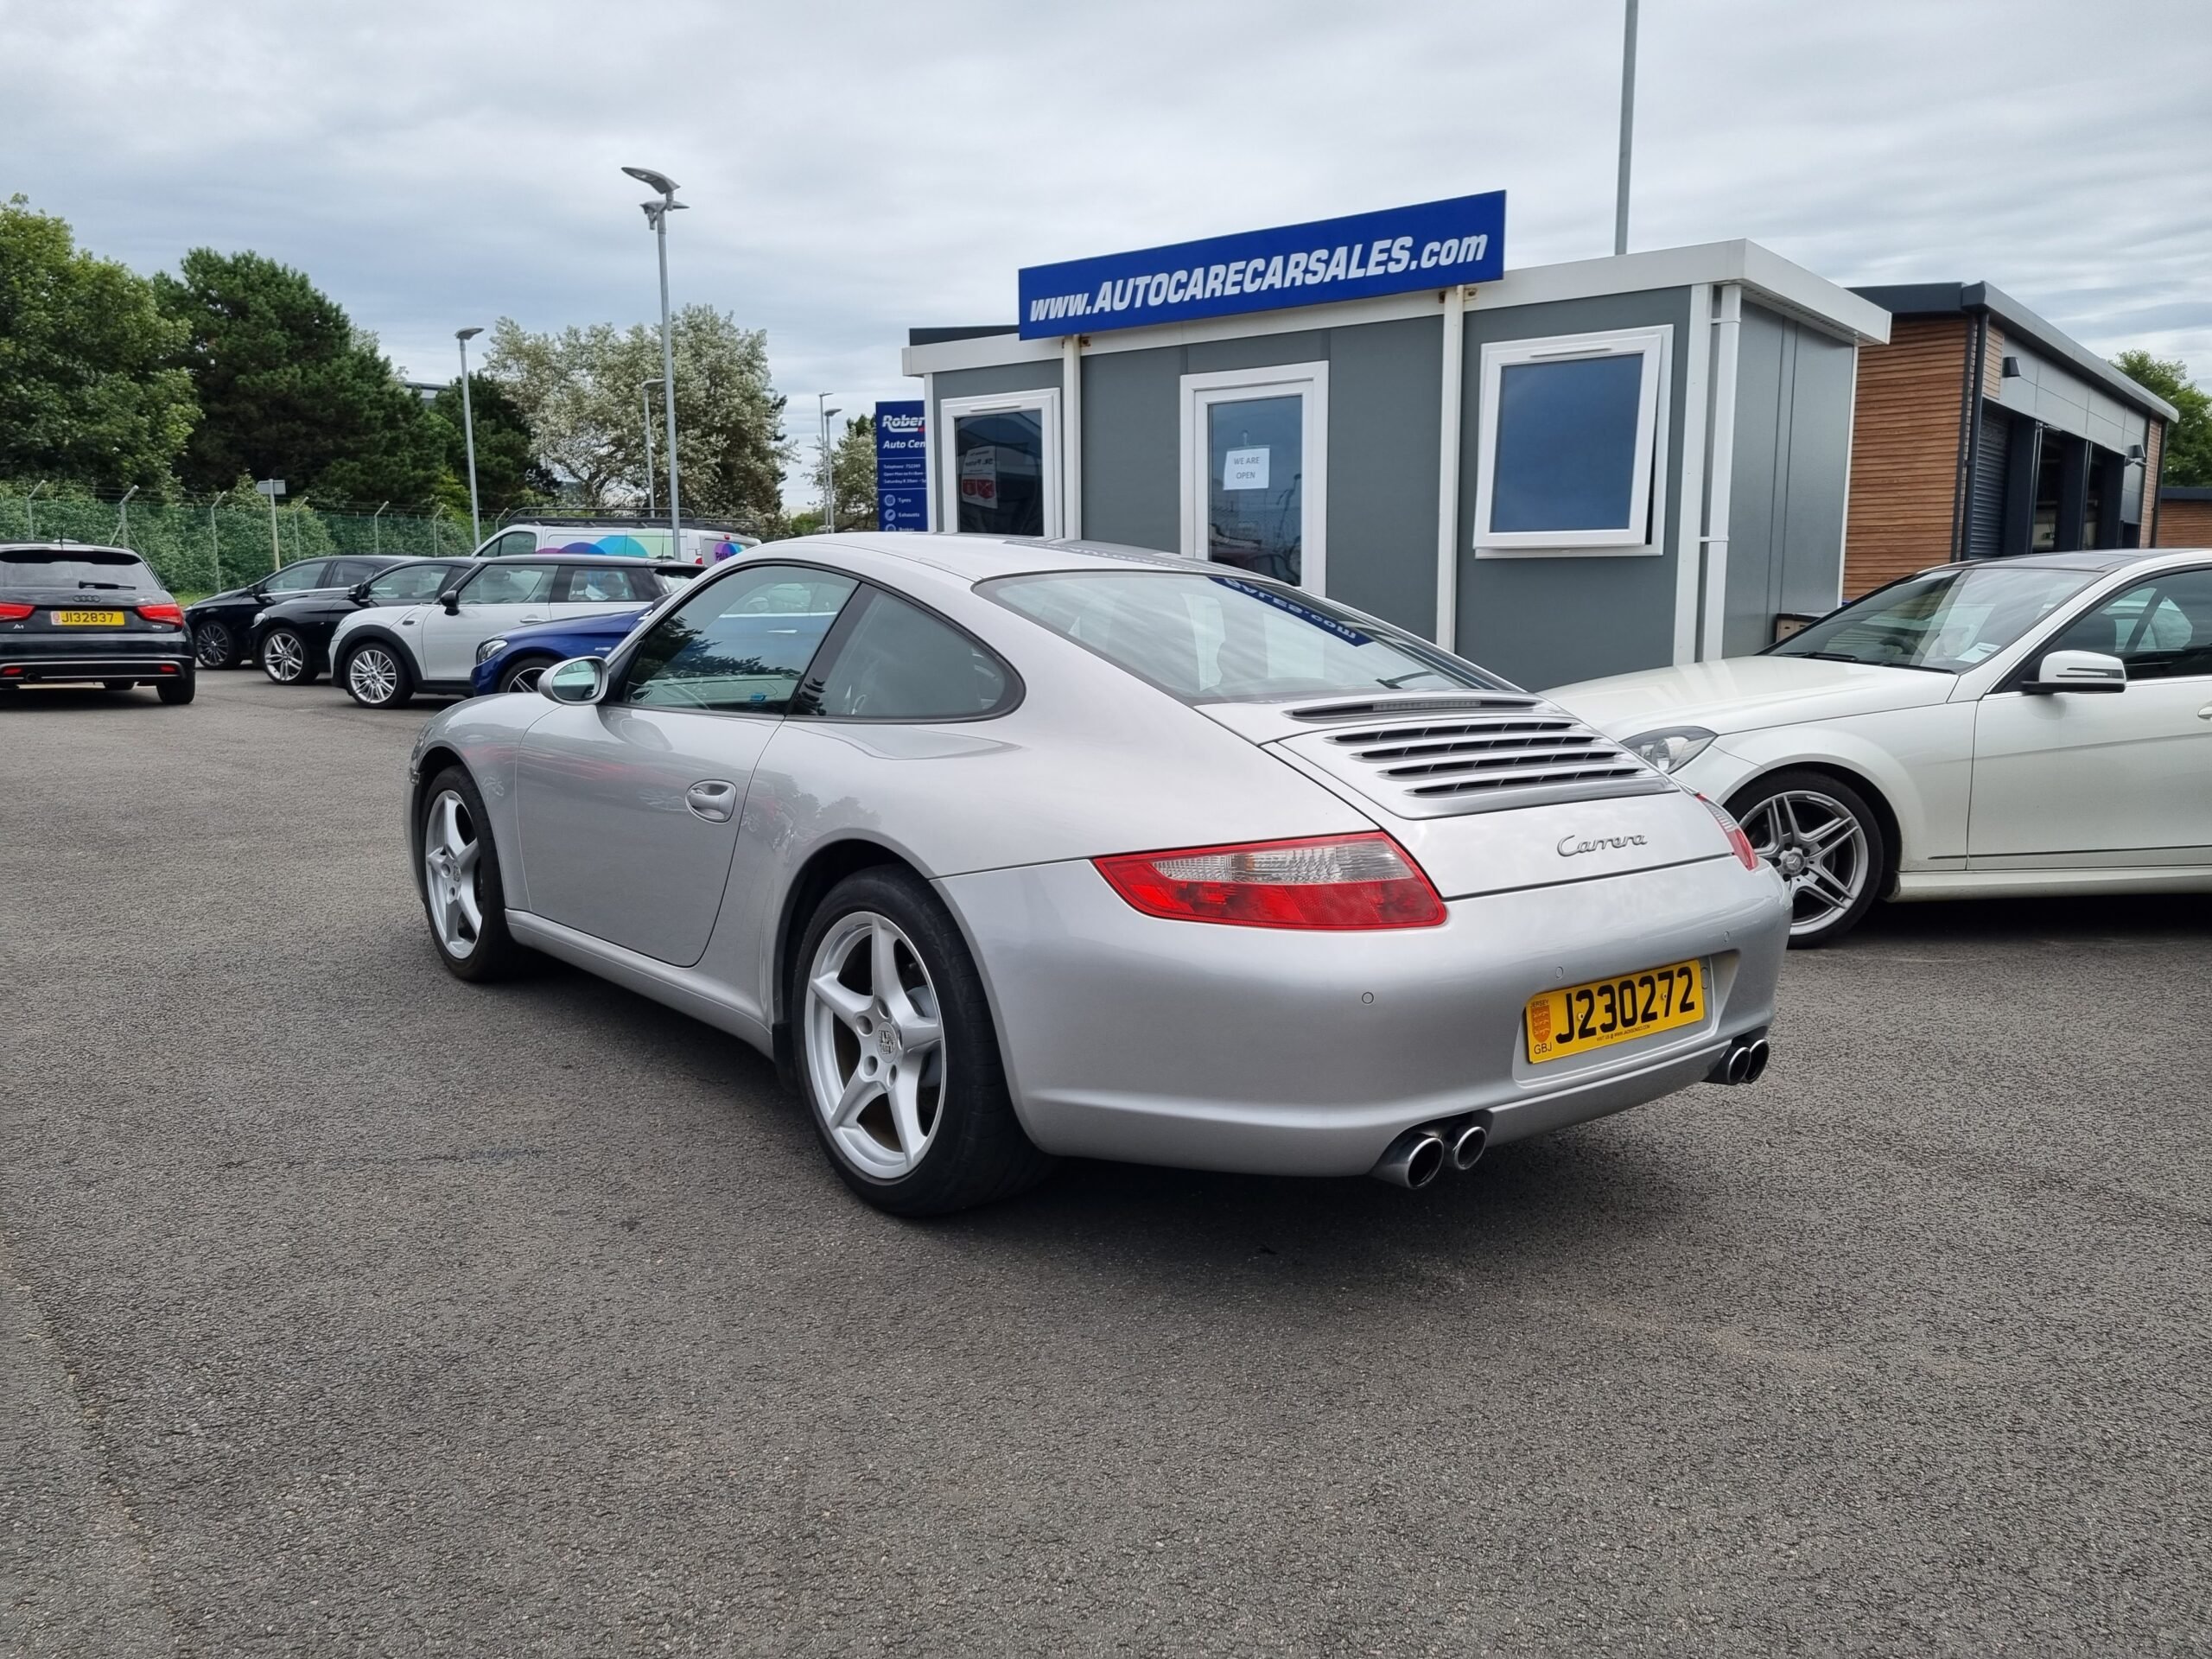 2007 Porsche 911 36 Rwd Carrera Manual Coupe Switchable Exhaustnavigationfull Service History 8